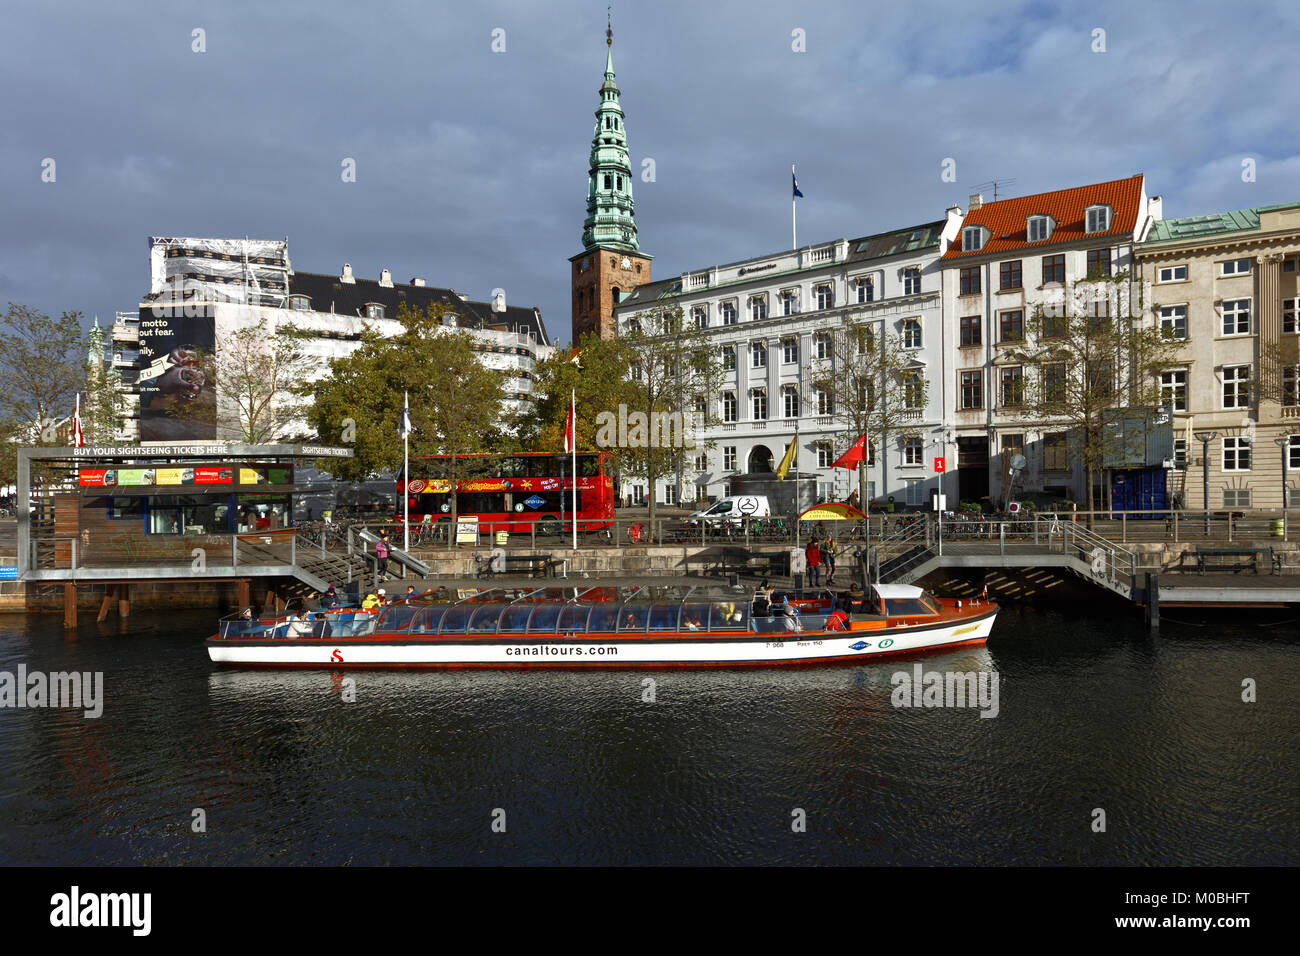 Copenhagen, Denmark - November 7, 2016: Sightseeing bus and tour boat at Ved Stranden street. Sightseeing tours is very popular among tourists Stock Photo